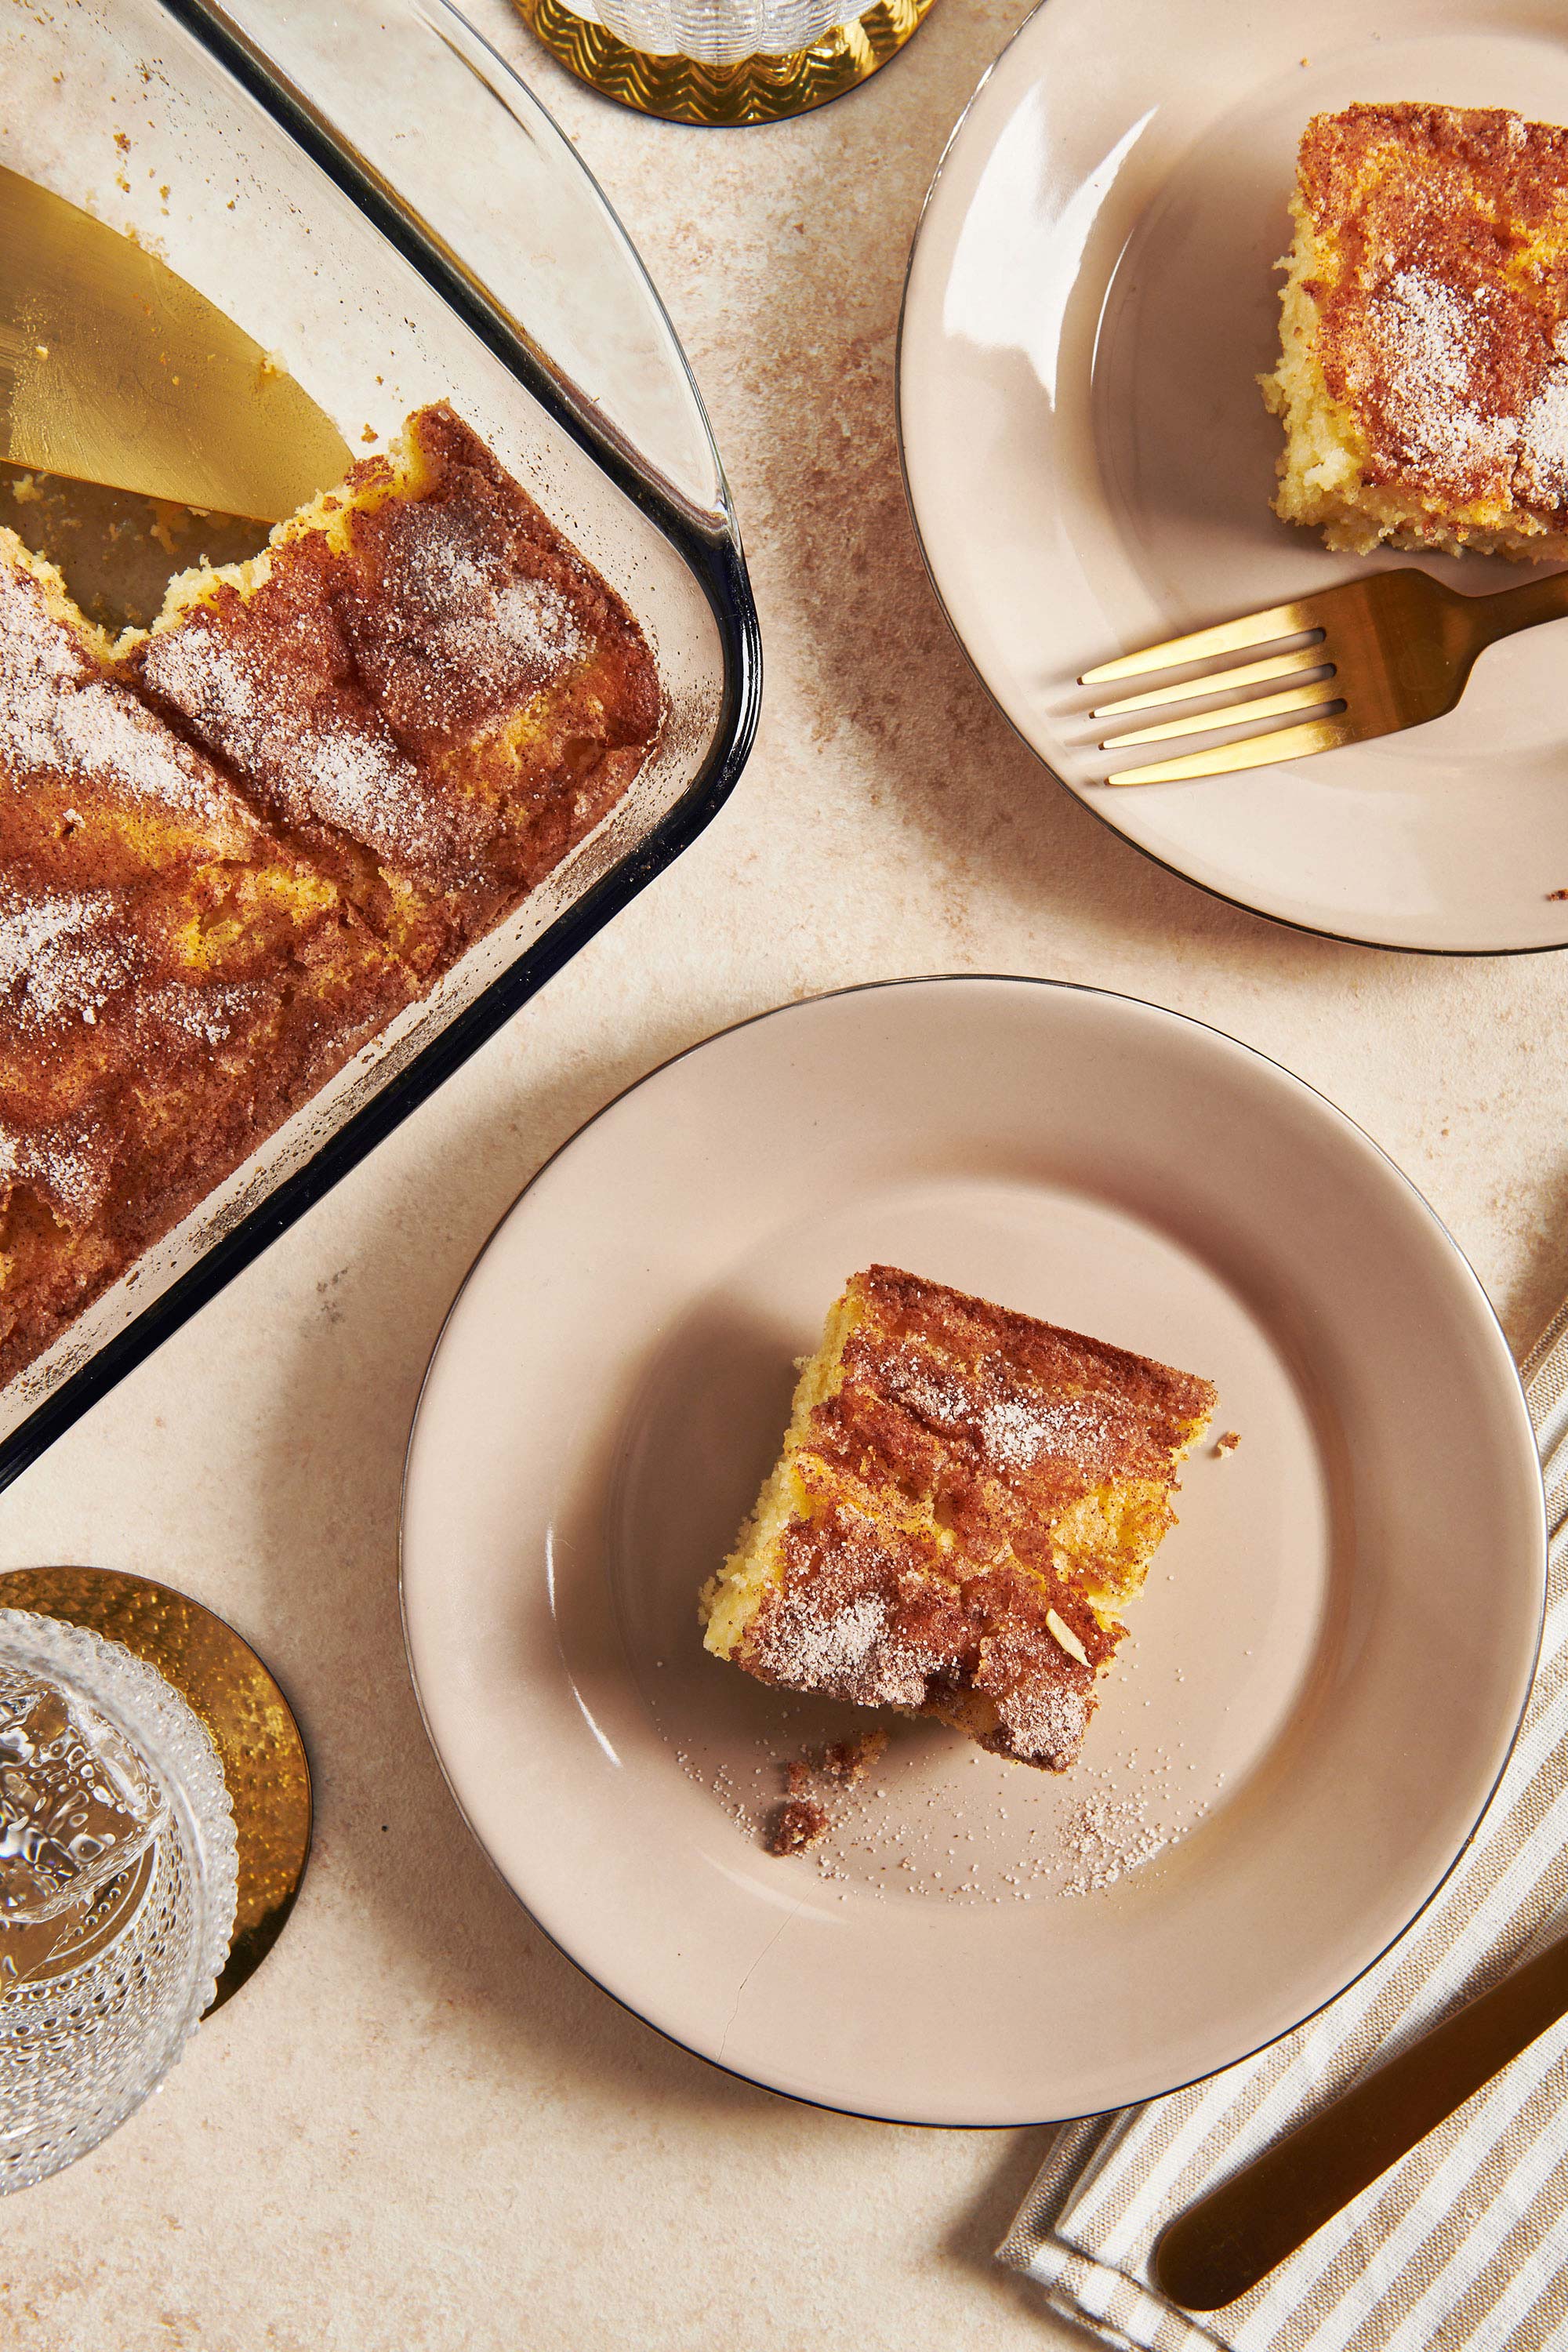 Slices of Apple Coffee Cake on small plates.